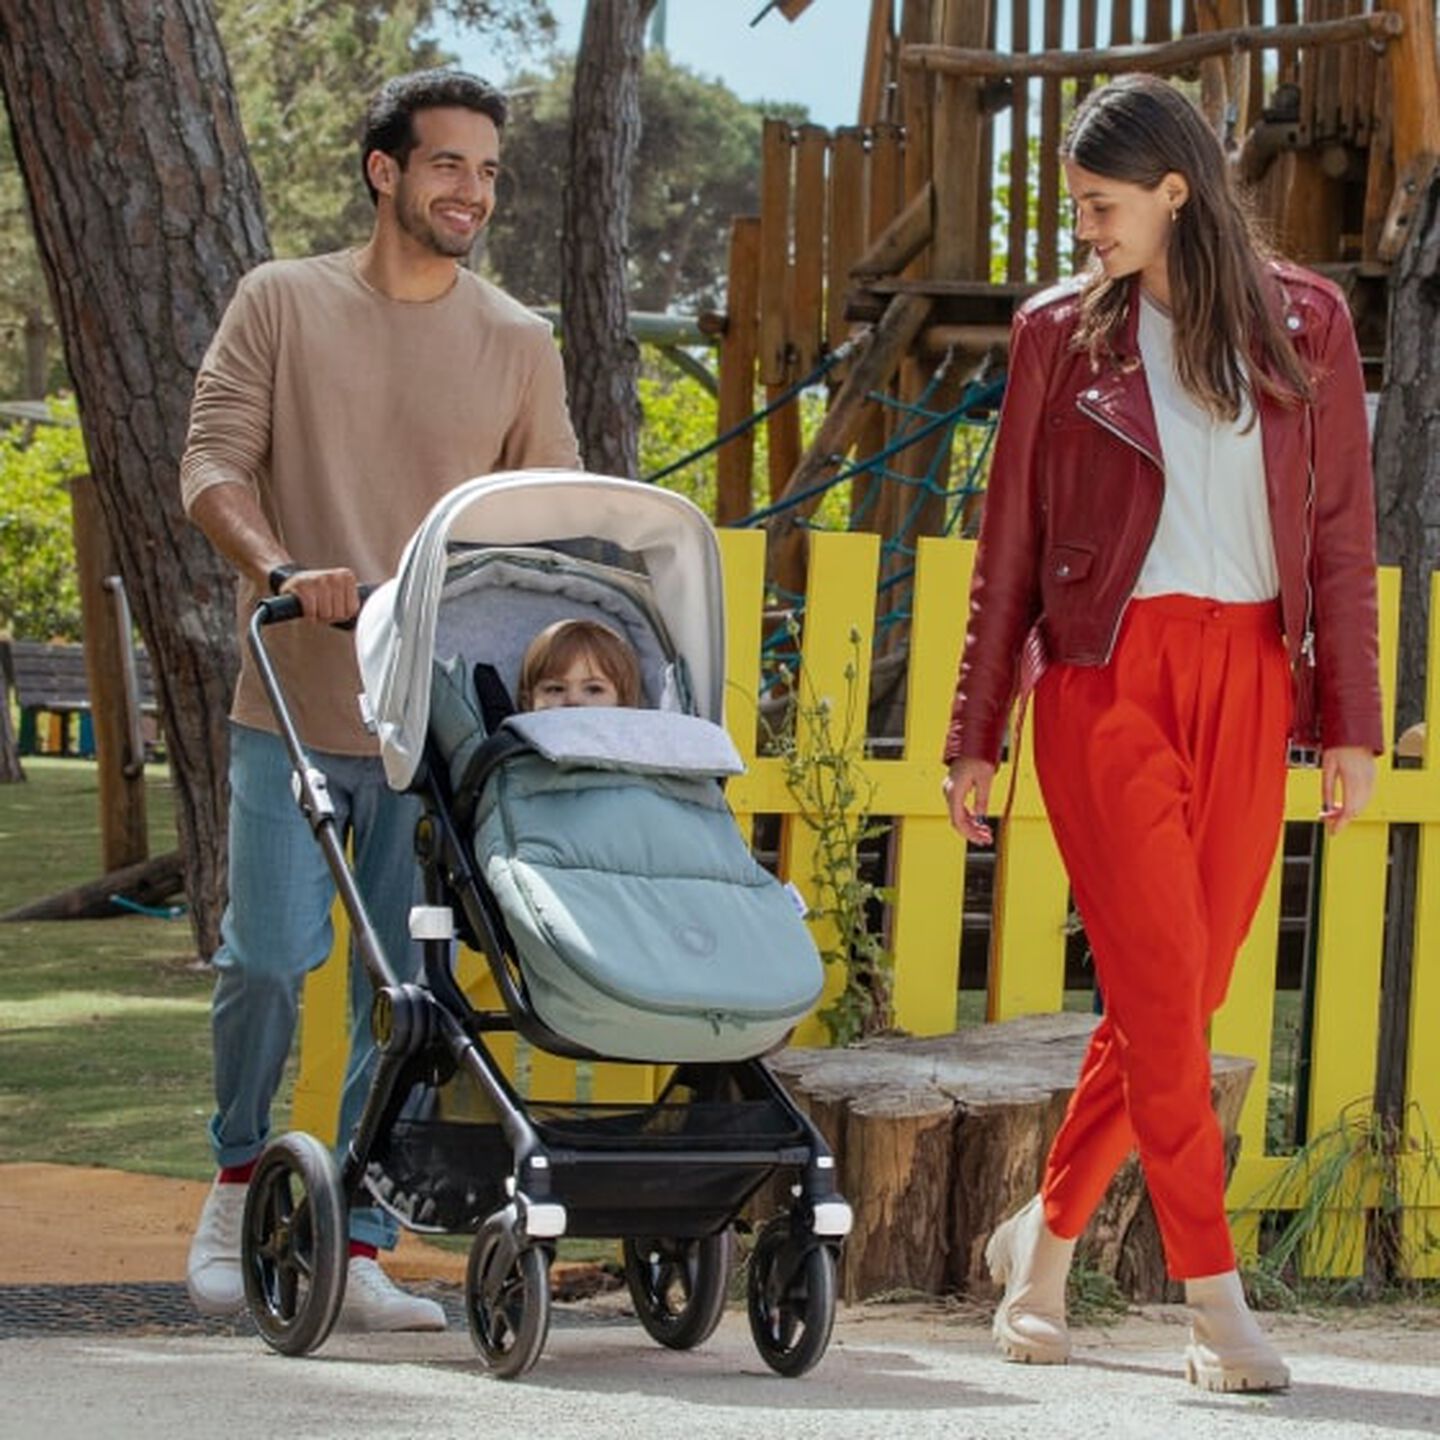 Bugaboo Fox 3 Our Most Comfortable 2-in-1 Travel System